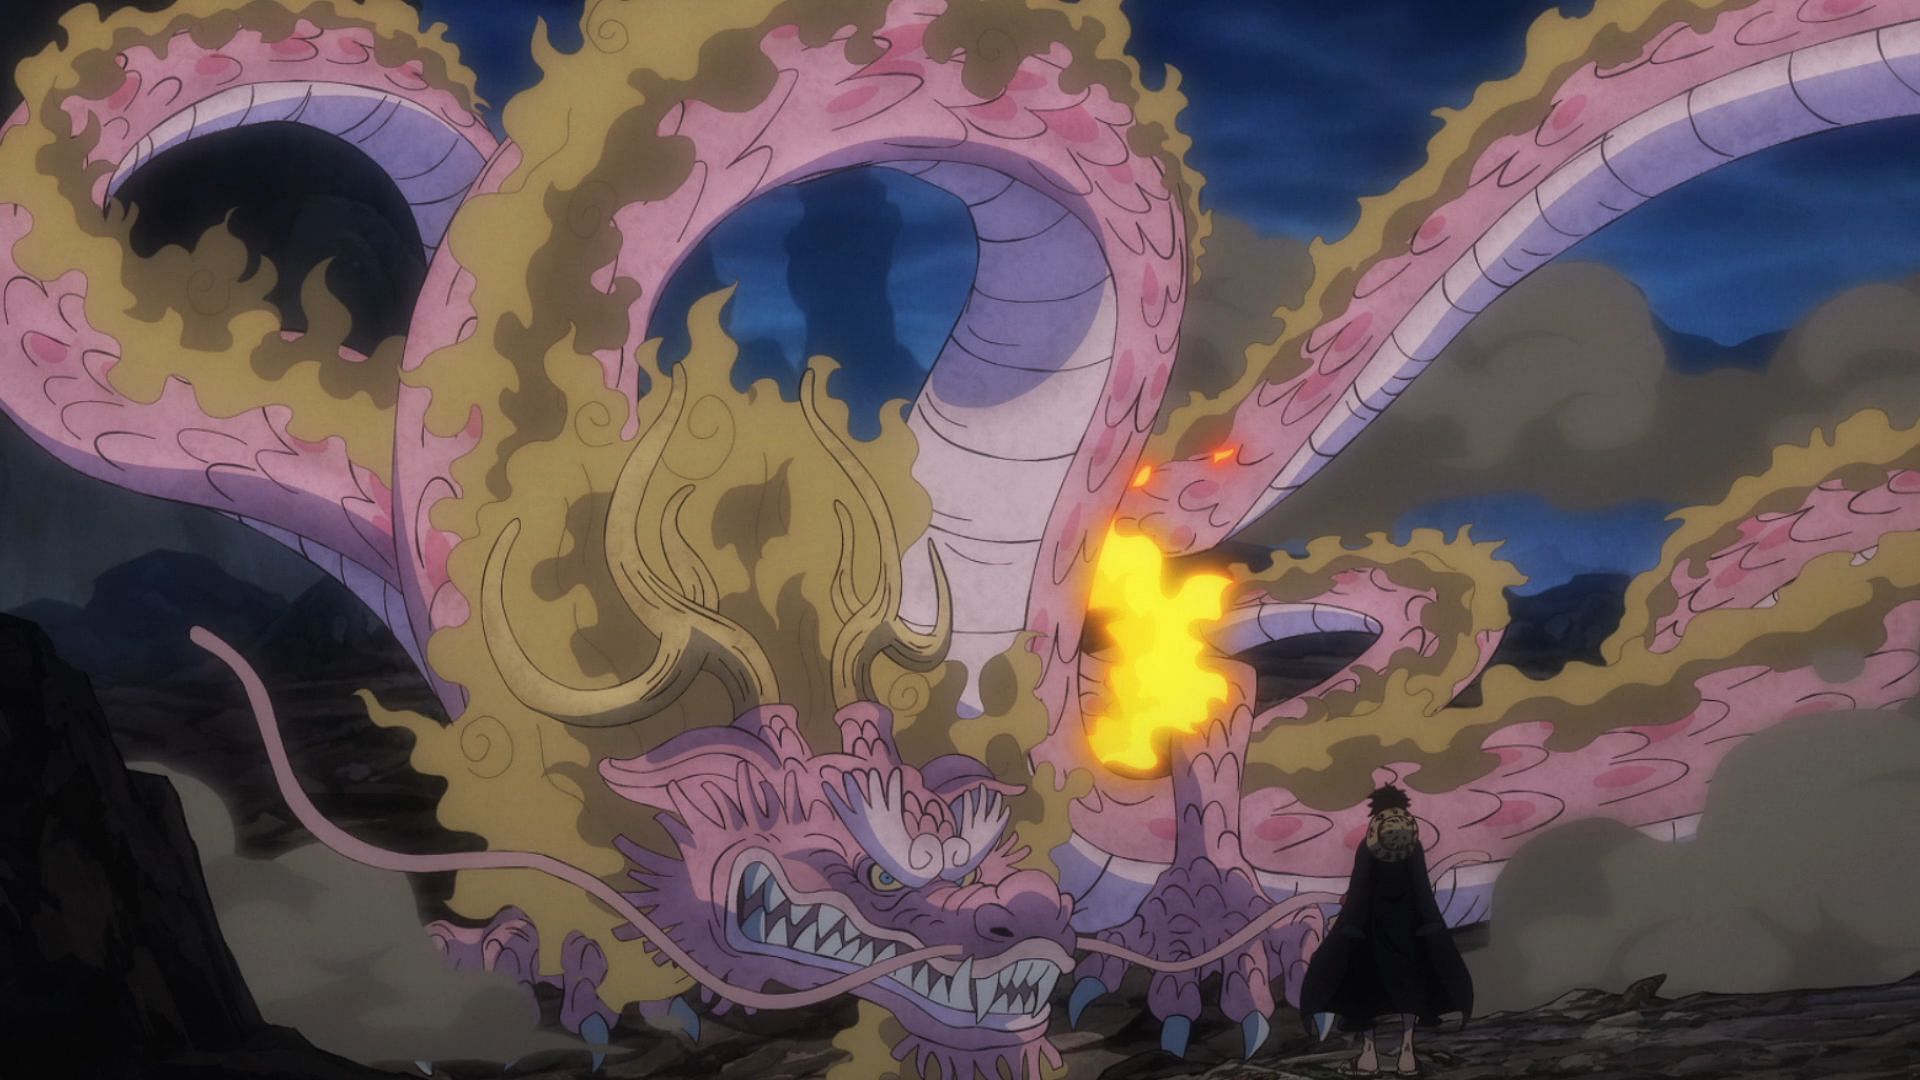 Why isn't there One Piece Episode 1074 this week? - Dexerto